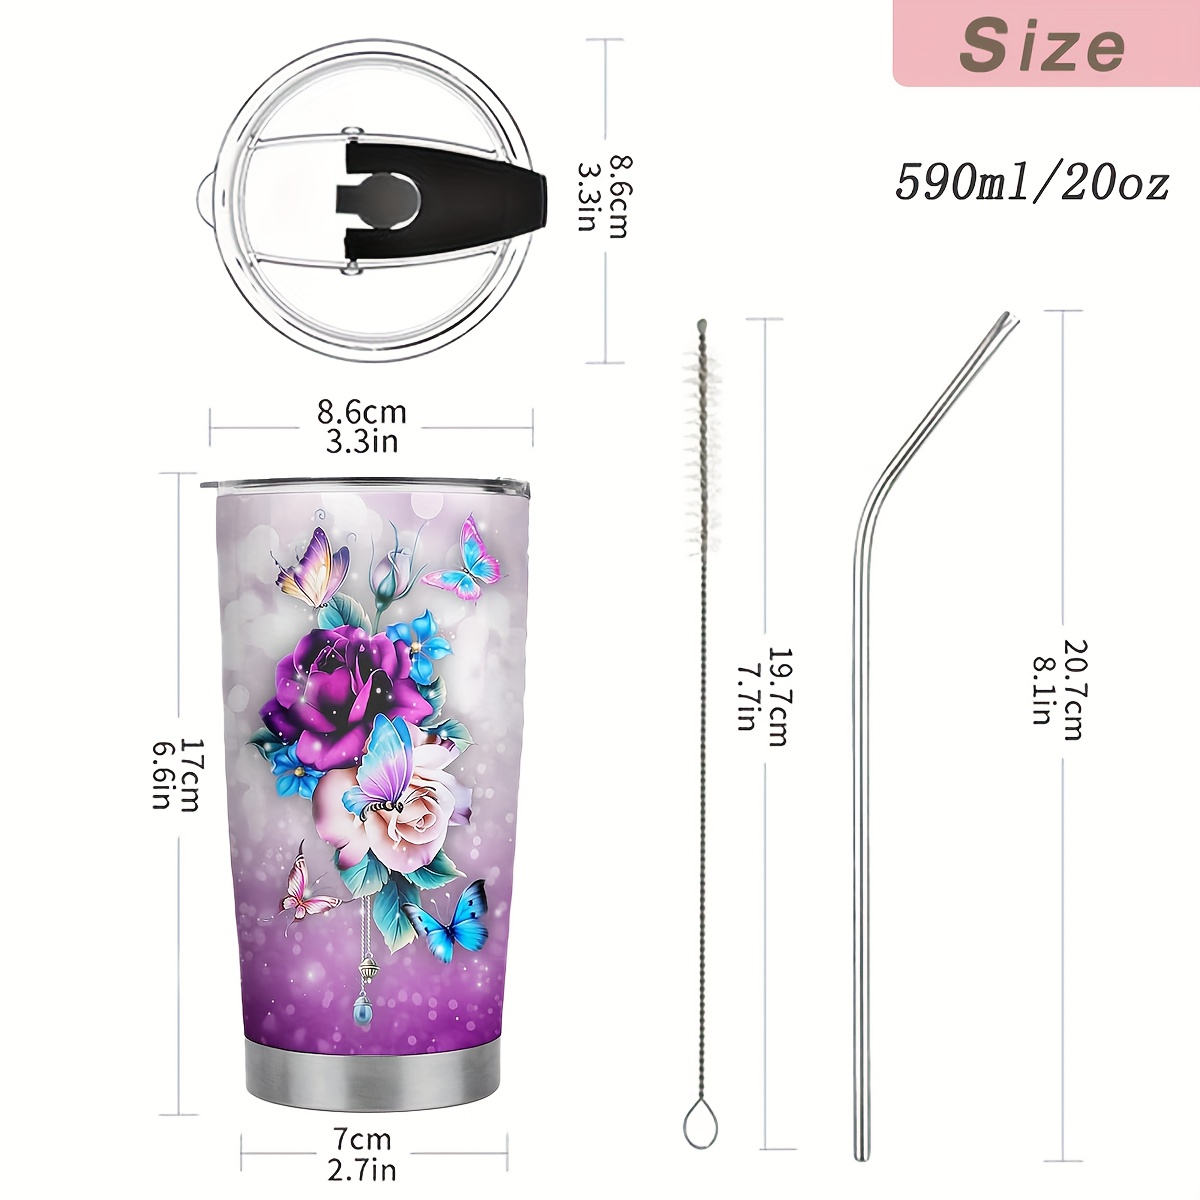 Vprintes Mom Gifts from Daughters - 20oz Stainless Steel Insulated Ros